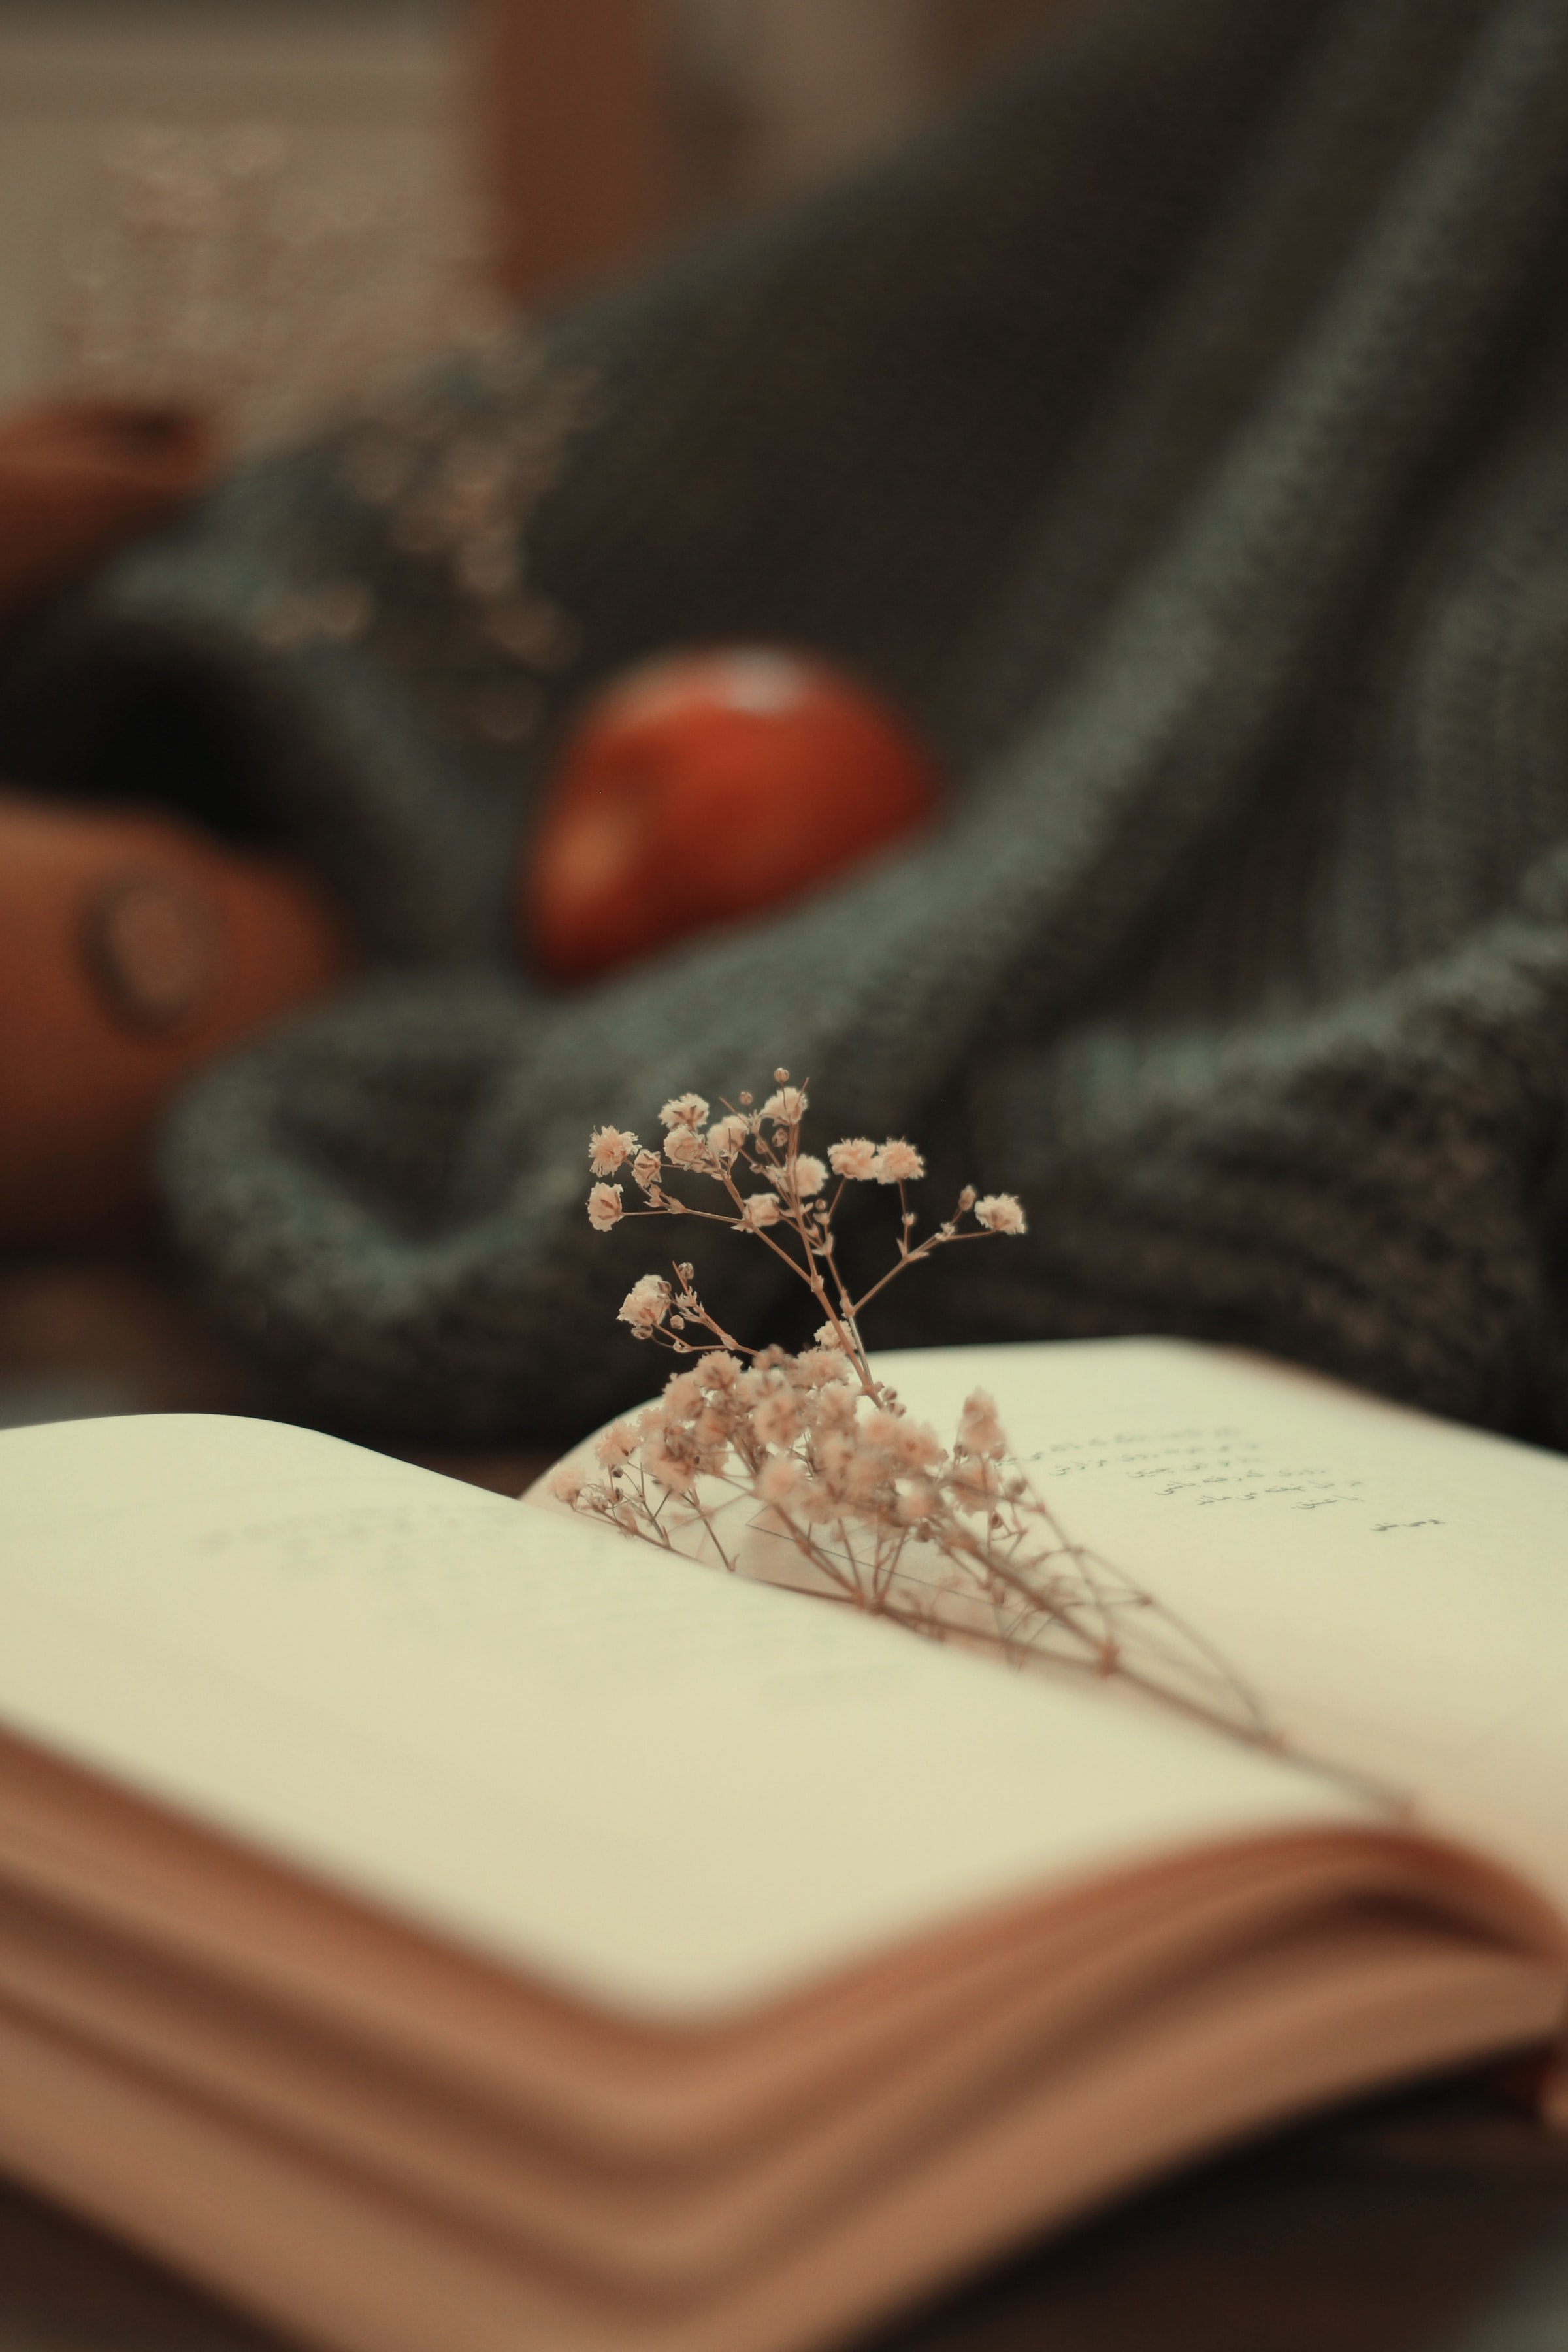 flowers, miscellanea, miscellaneous, book, pages, page, dried flowers, dryflower Full HD